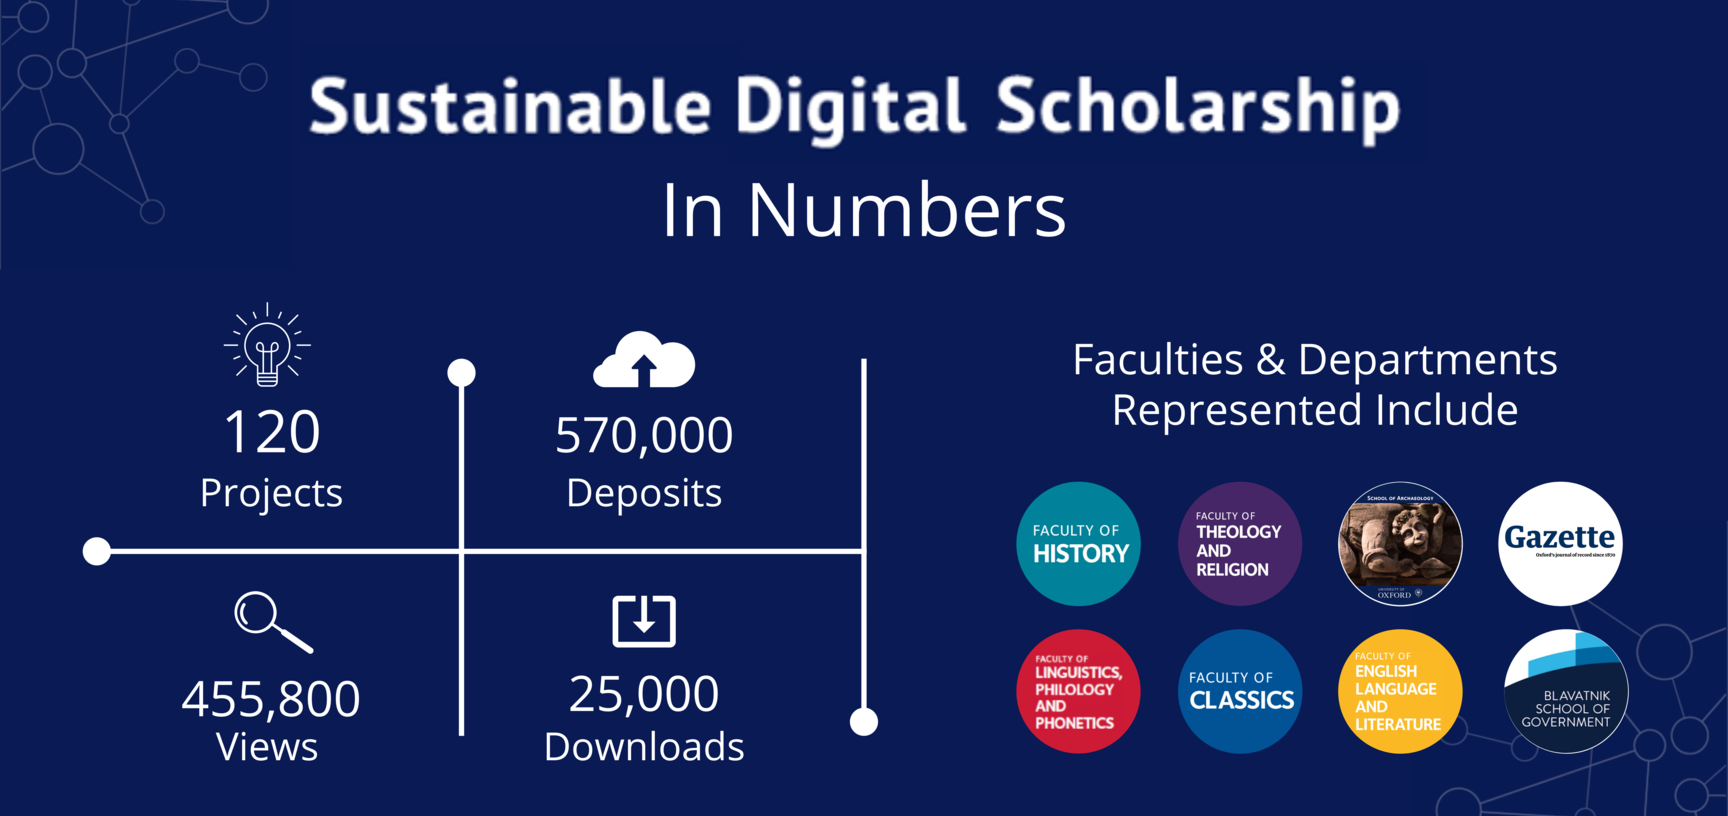 An overview of the Sustainable Digital Scholarship one year activity.